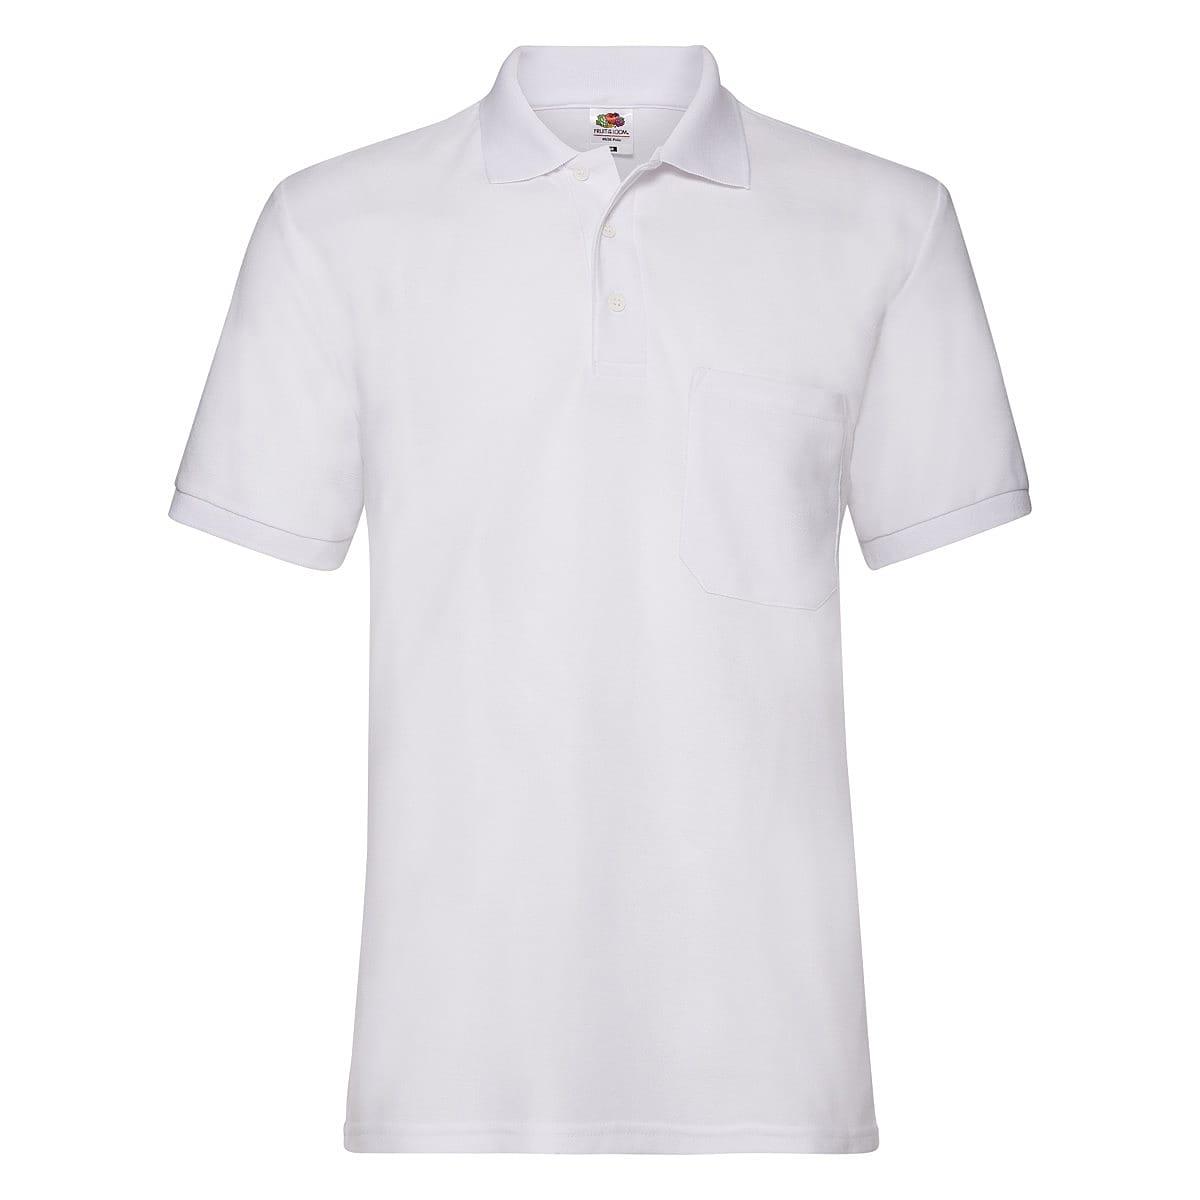 Fruit Of The Loom Pocket 65/35 Pique Polo Shirt | 63308 | Workwear ...